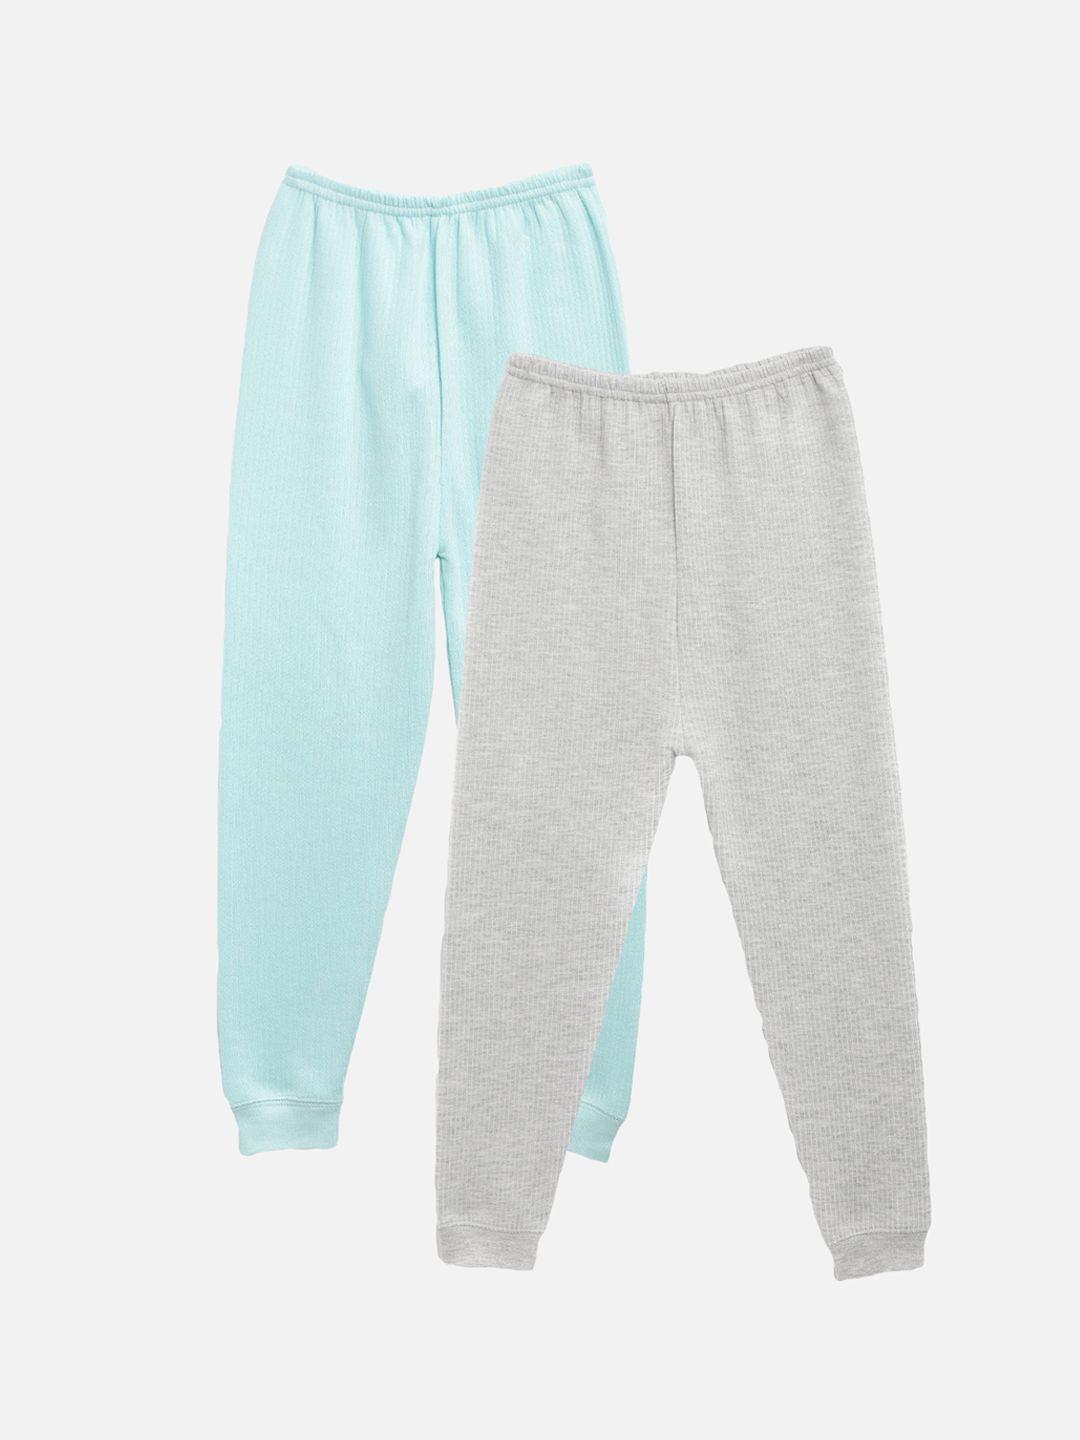 kanvin-boys-pack-of-2-grey-and-turquoise-blue-thermal-bottoms